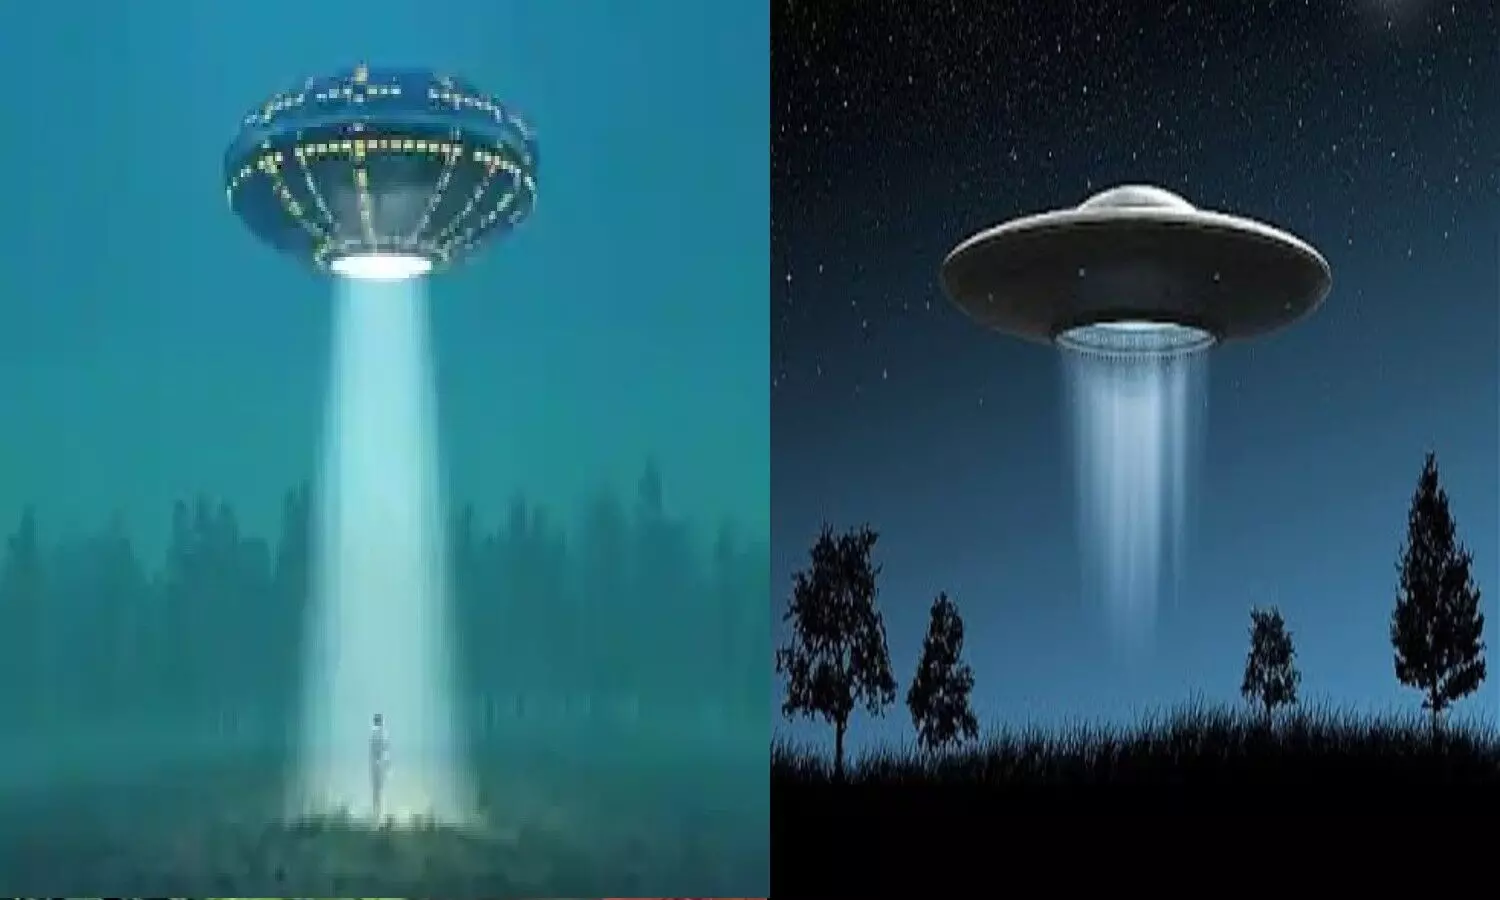 To track these alien vehicles, the Chinese Army has created a new Artificial Intelligence (AI) based tracking system.